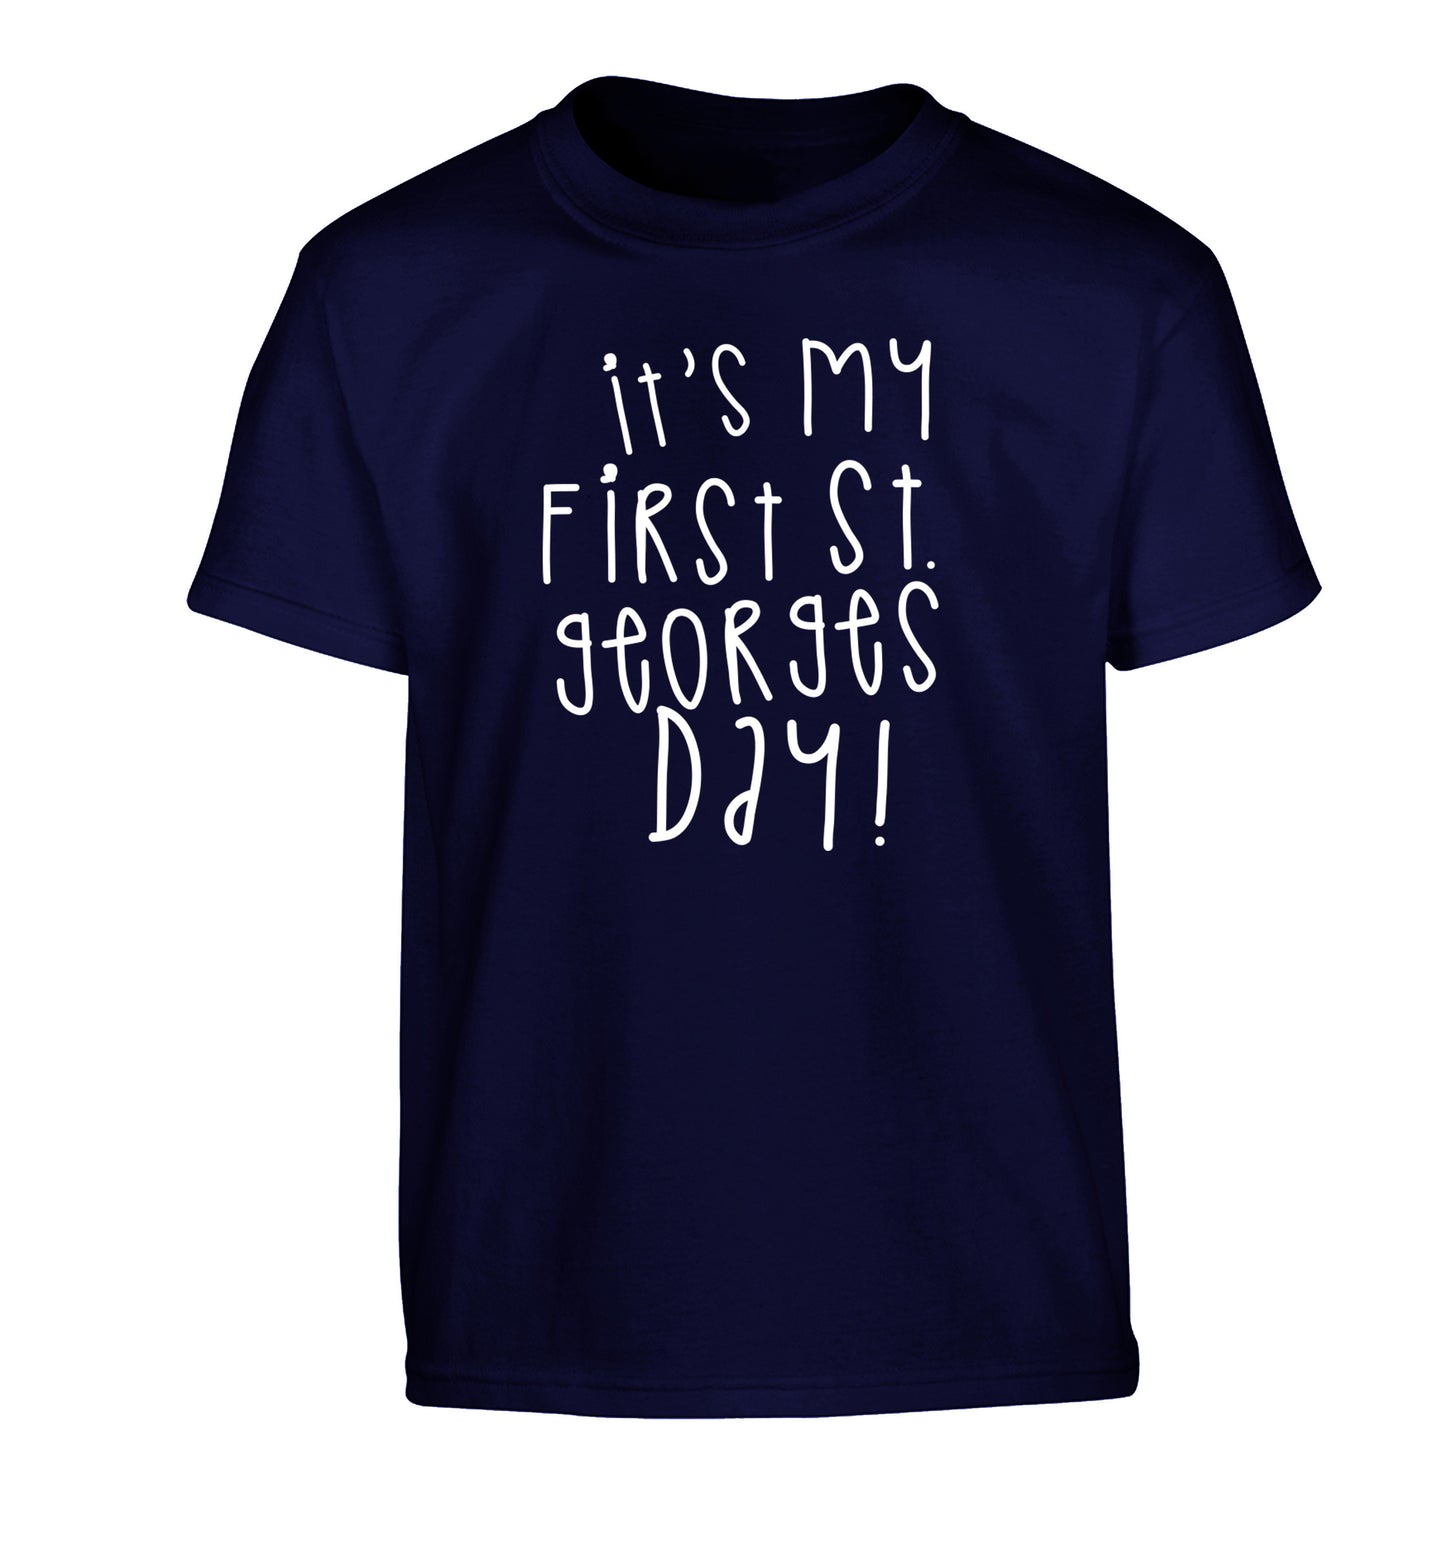 It's my first St Georges day Children's navy Tshirt 12-14 Years